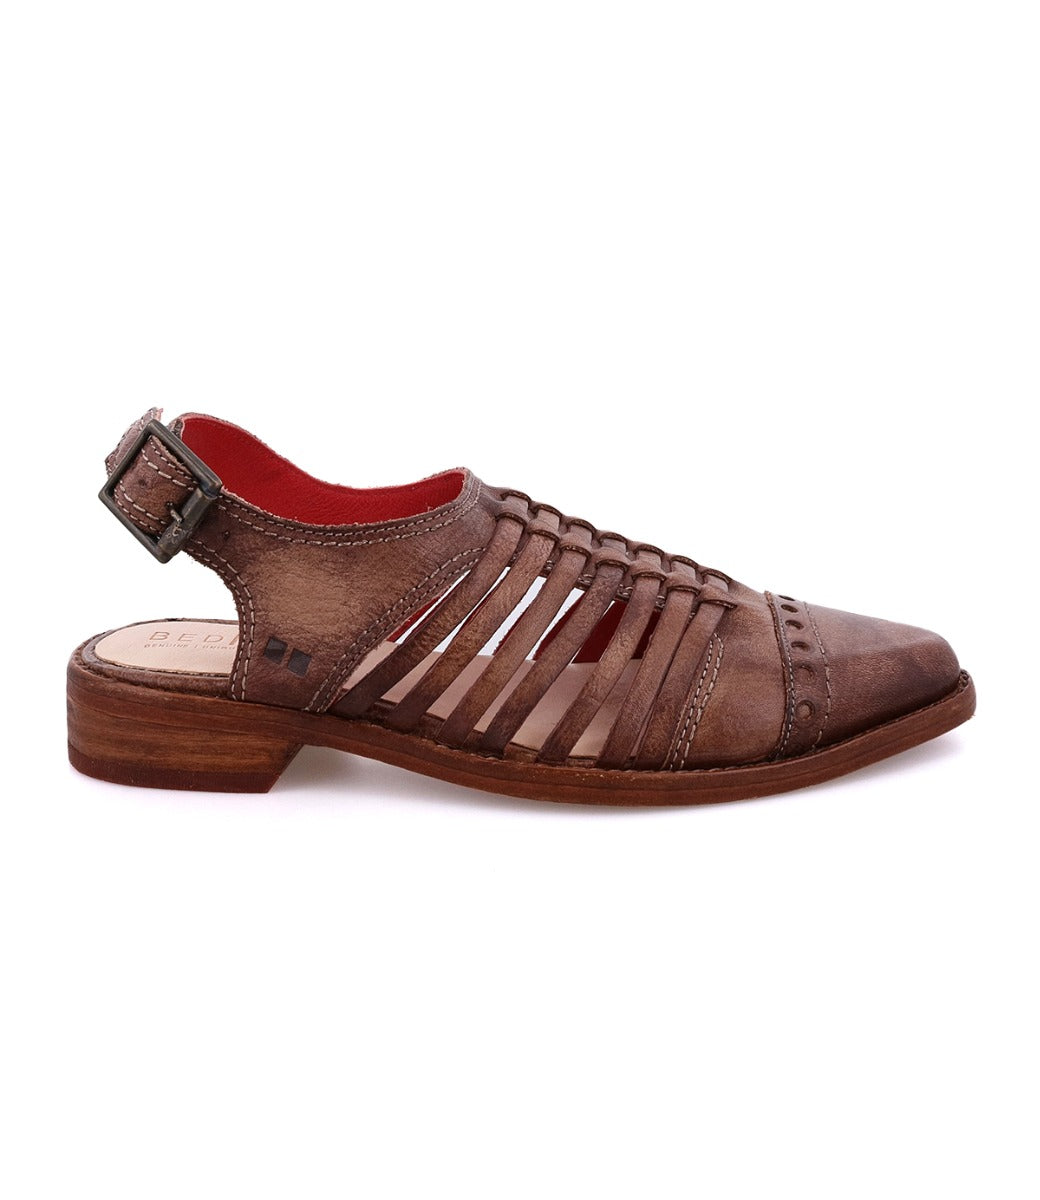 A women's teak leather sandal called the Kennya by Bed Stu.